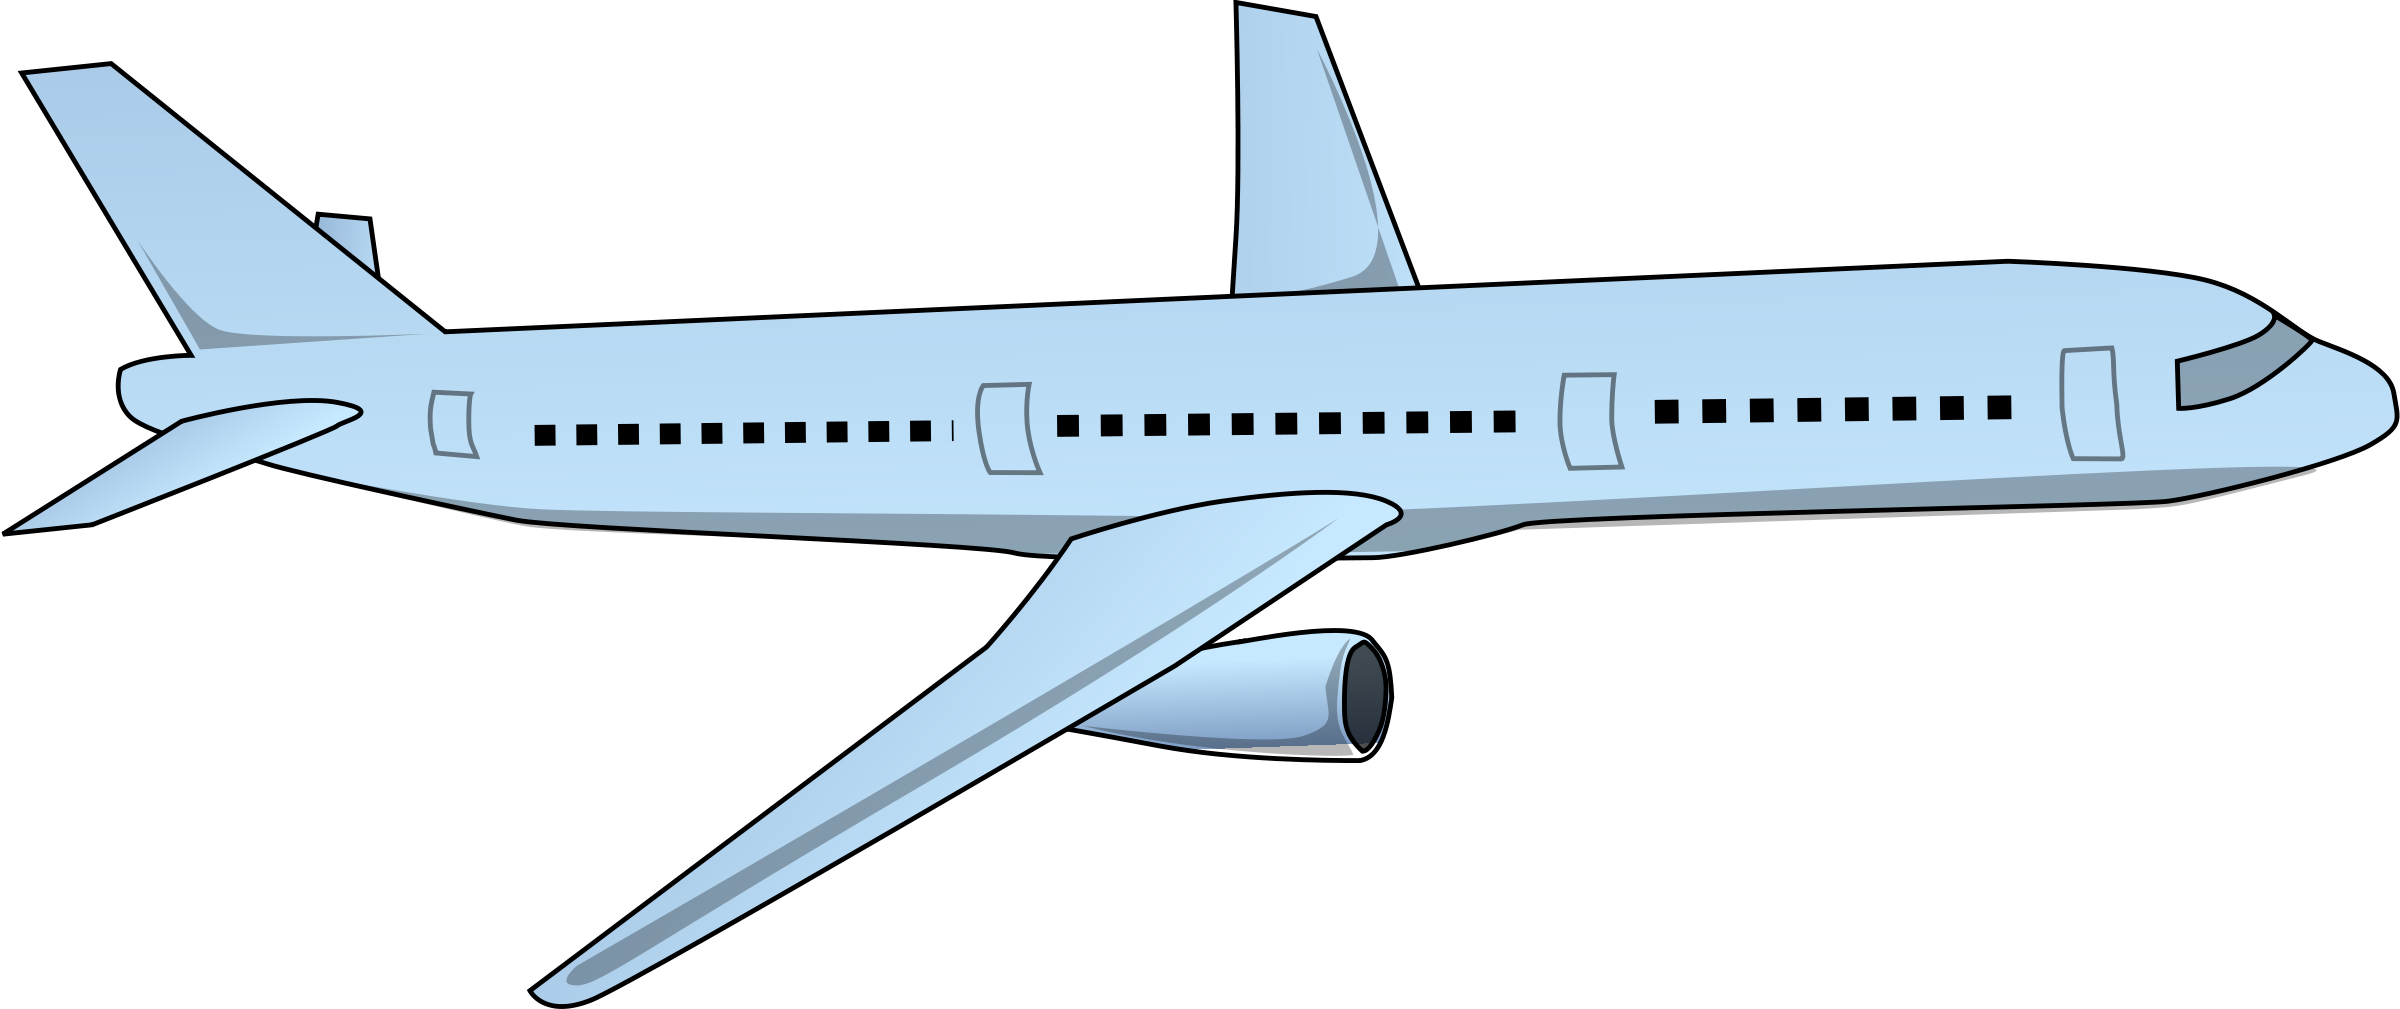 airplane clipart - Favourite Pictures